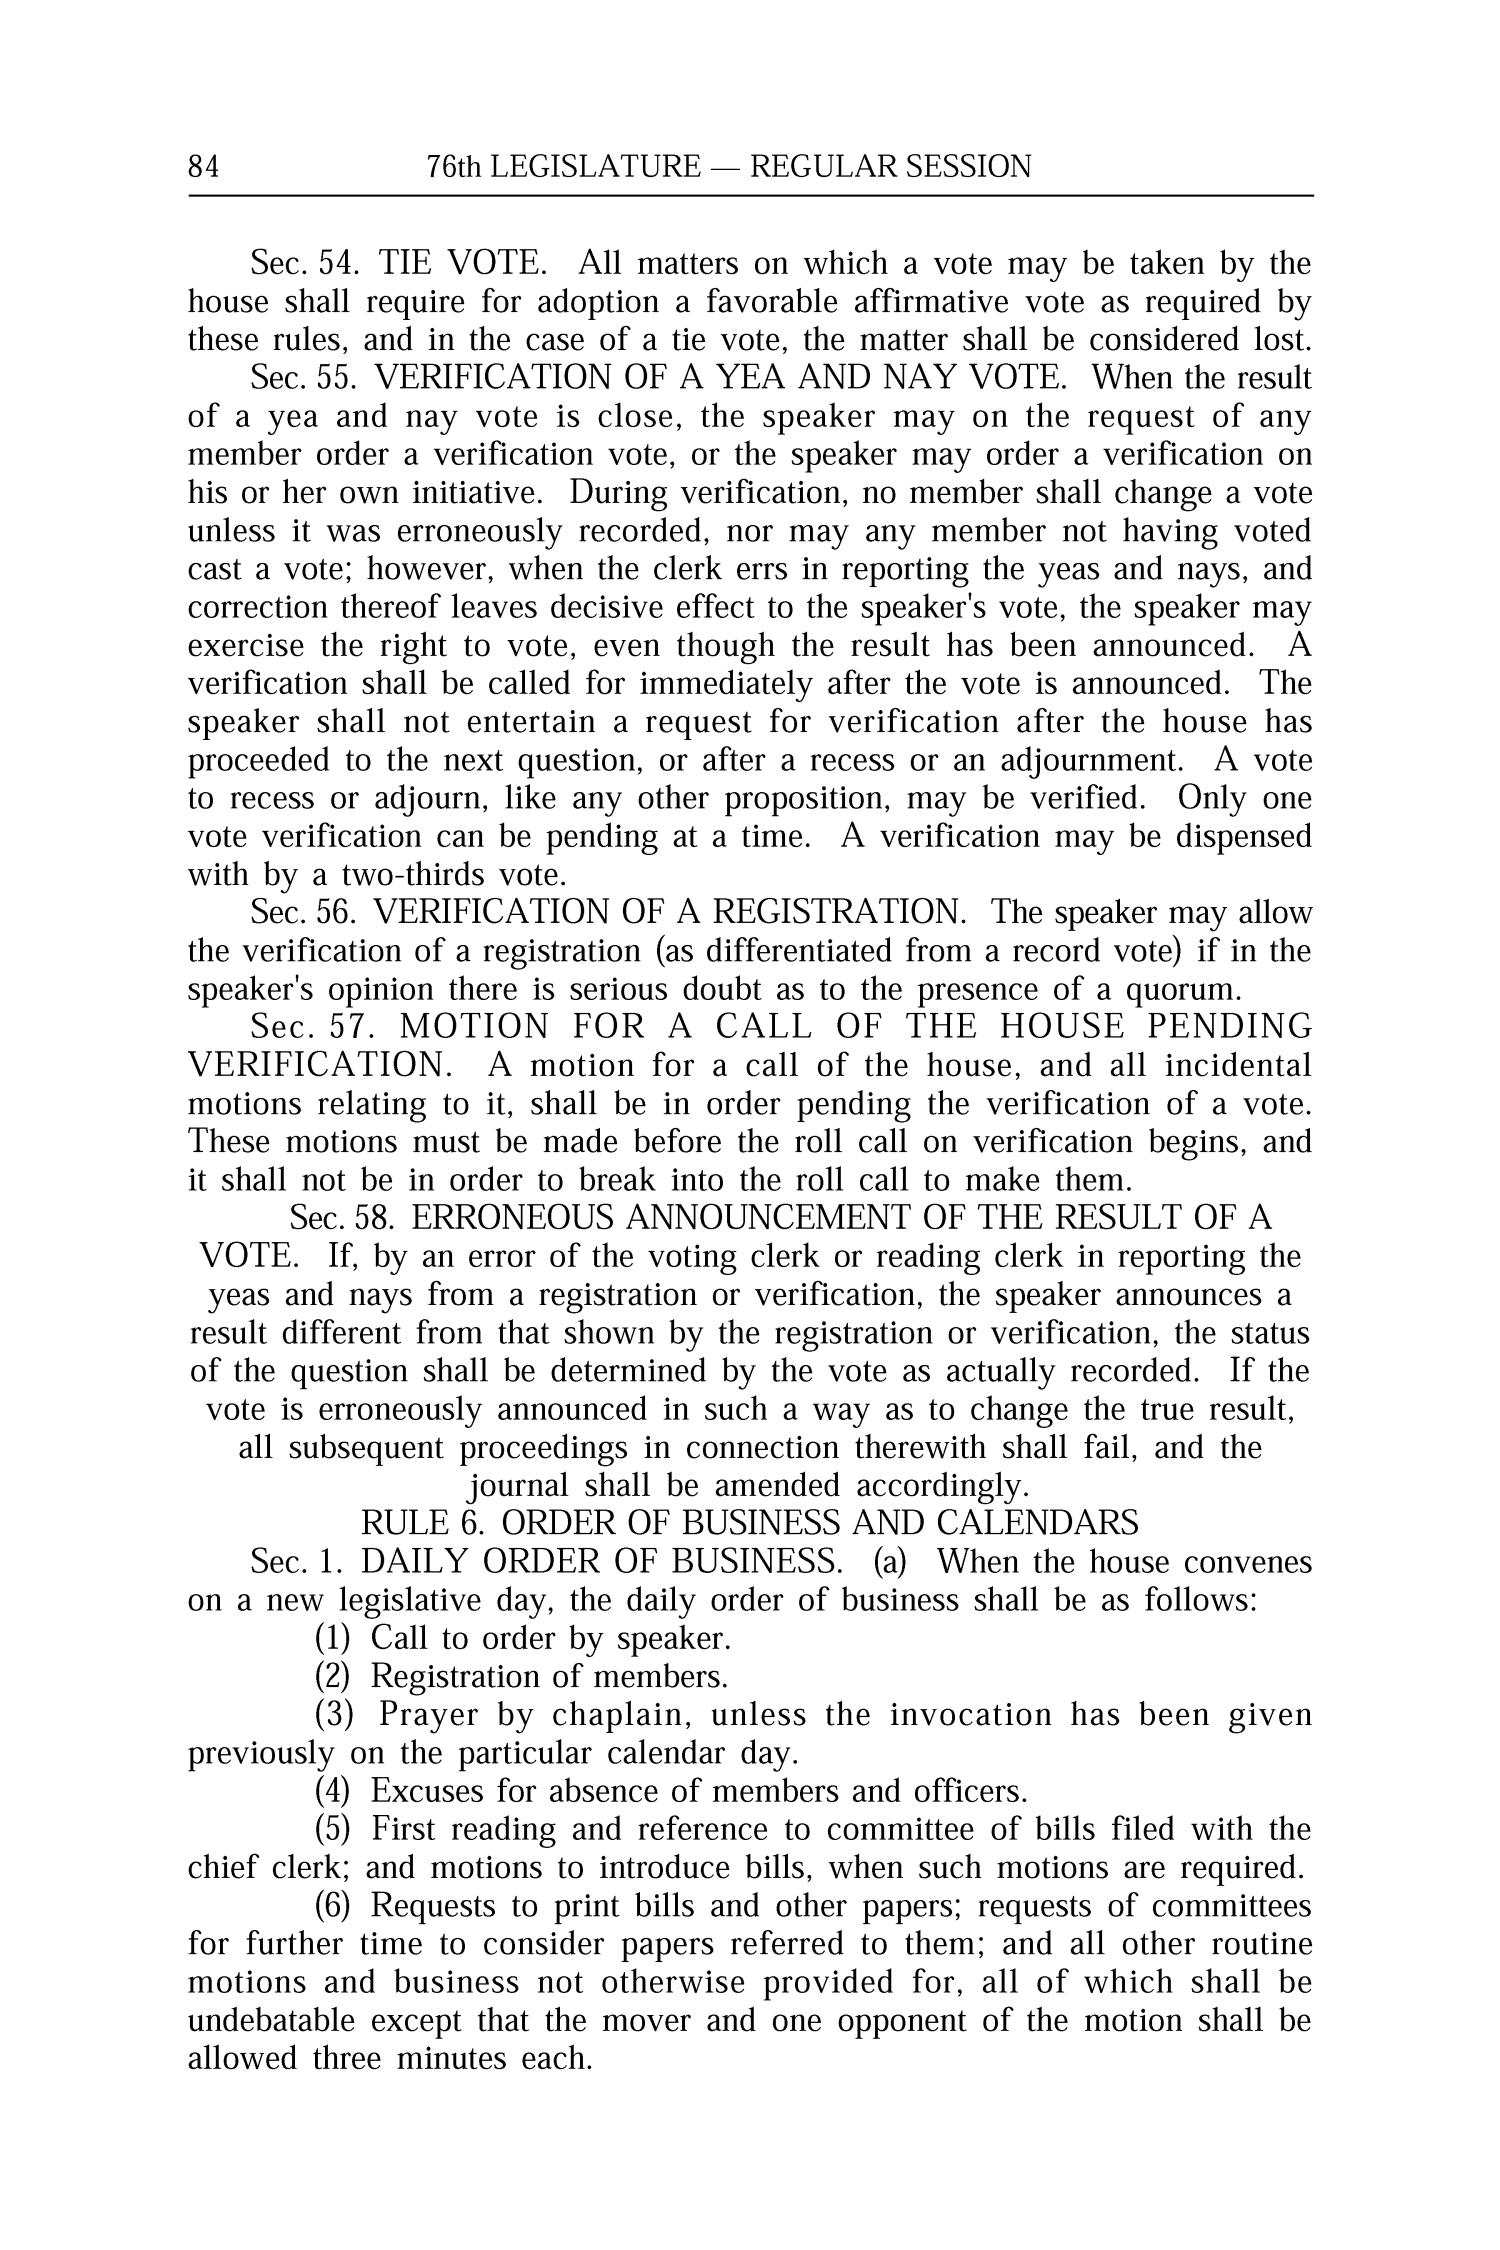 Journal of the House of Representatives of the Regular Session of the Seventy-Sixth Legislature of the State of Texas, Volume 1
                                                
                                                    84
                                                